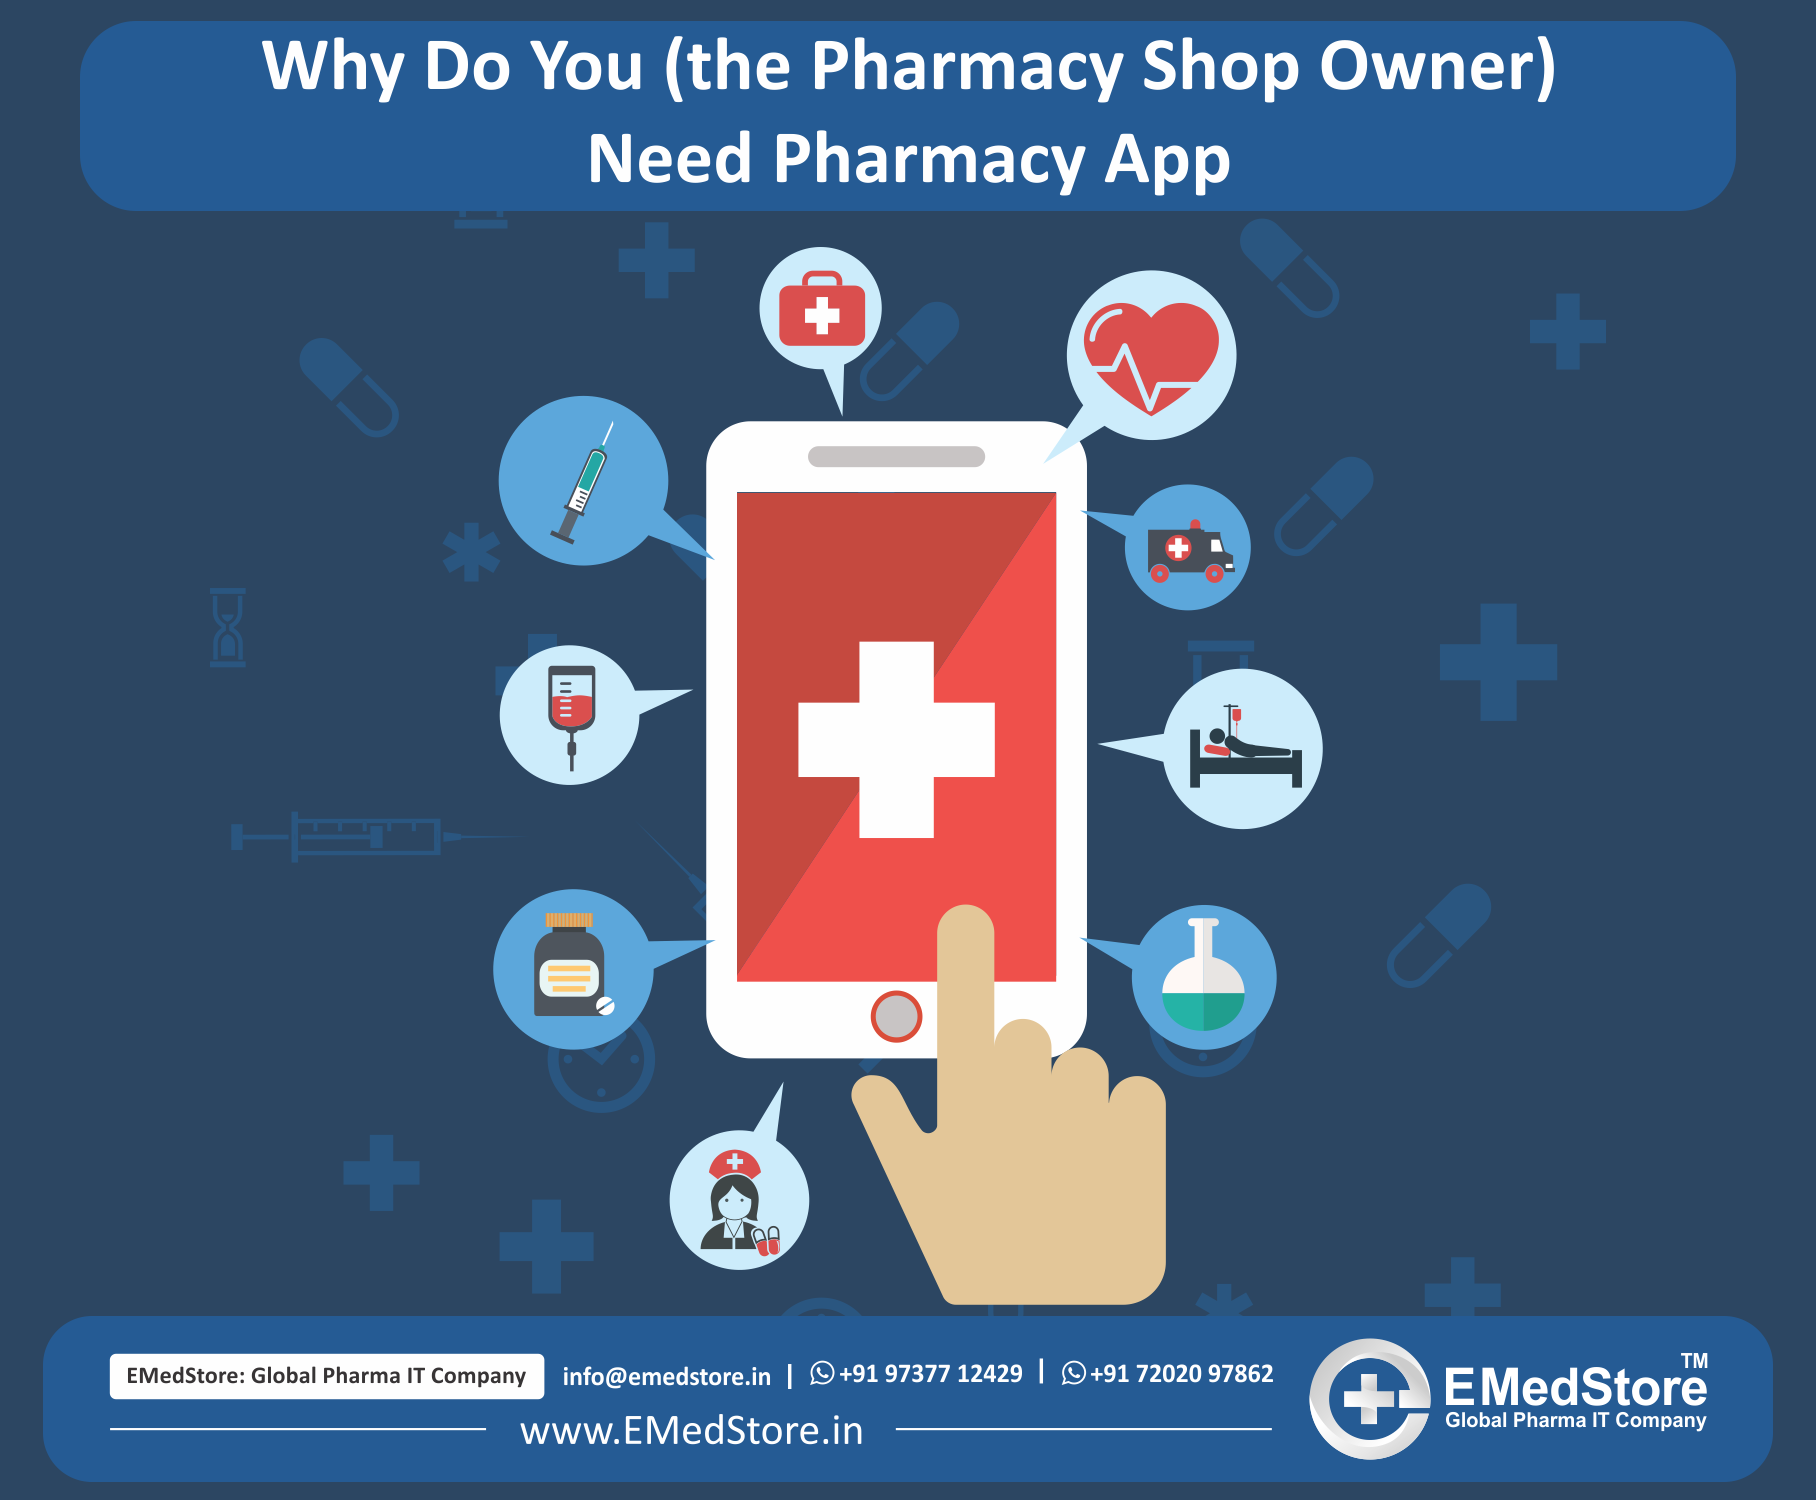 Why do you (the pharmacy shop owner) need pharmacy app